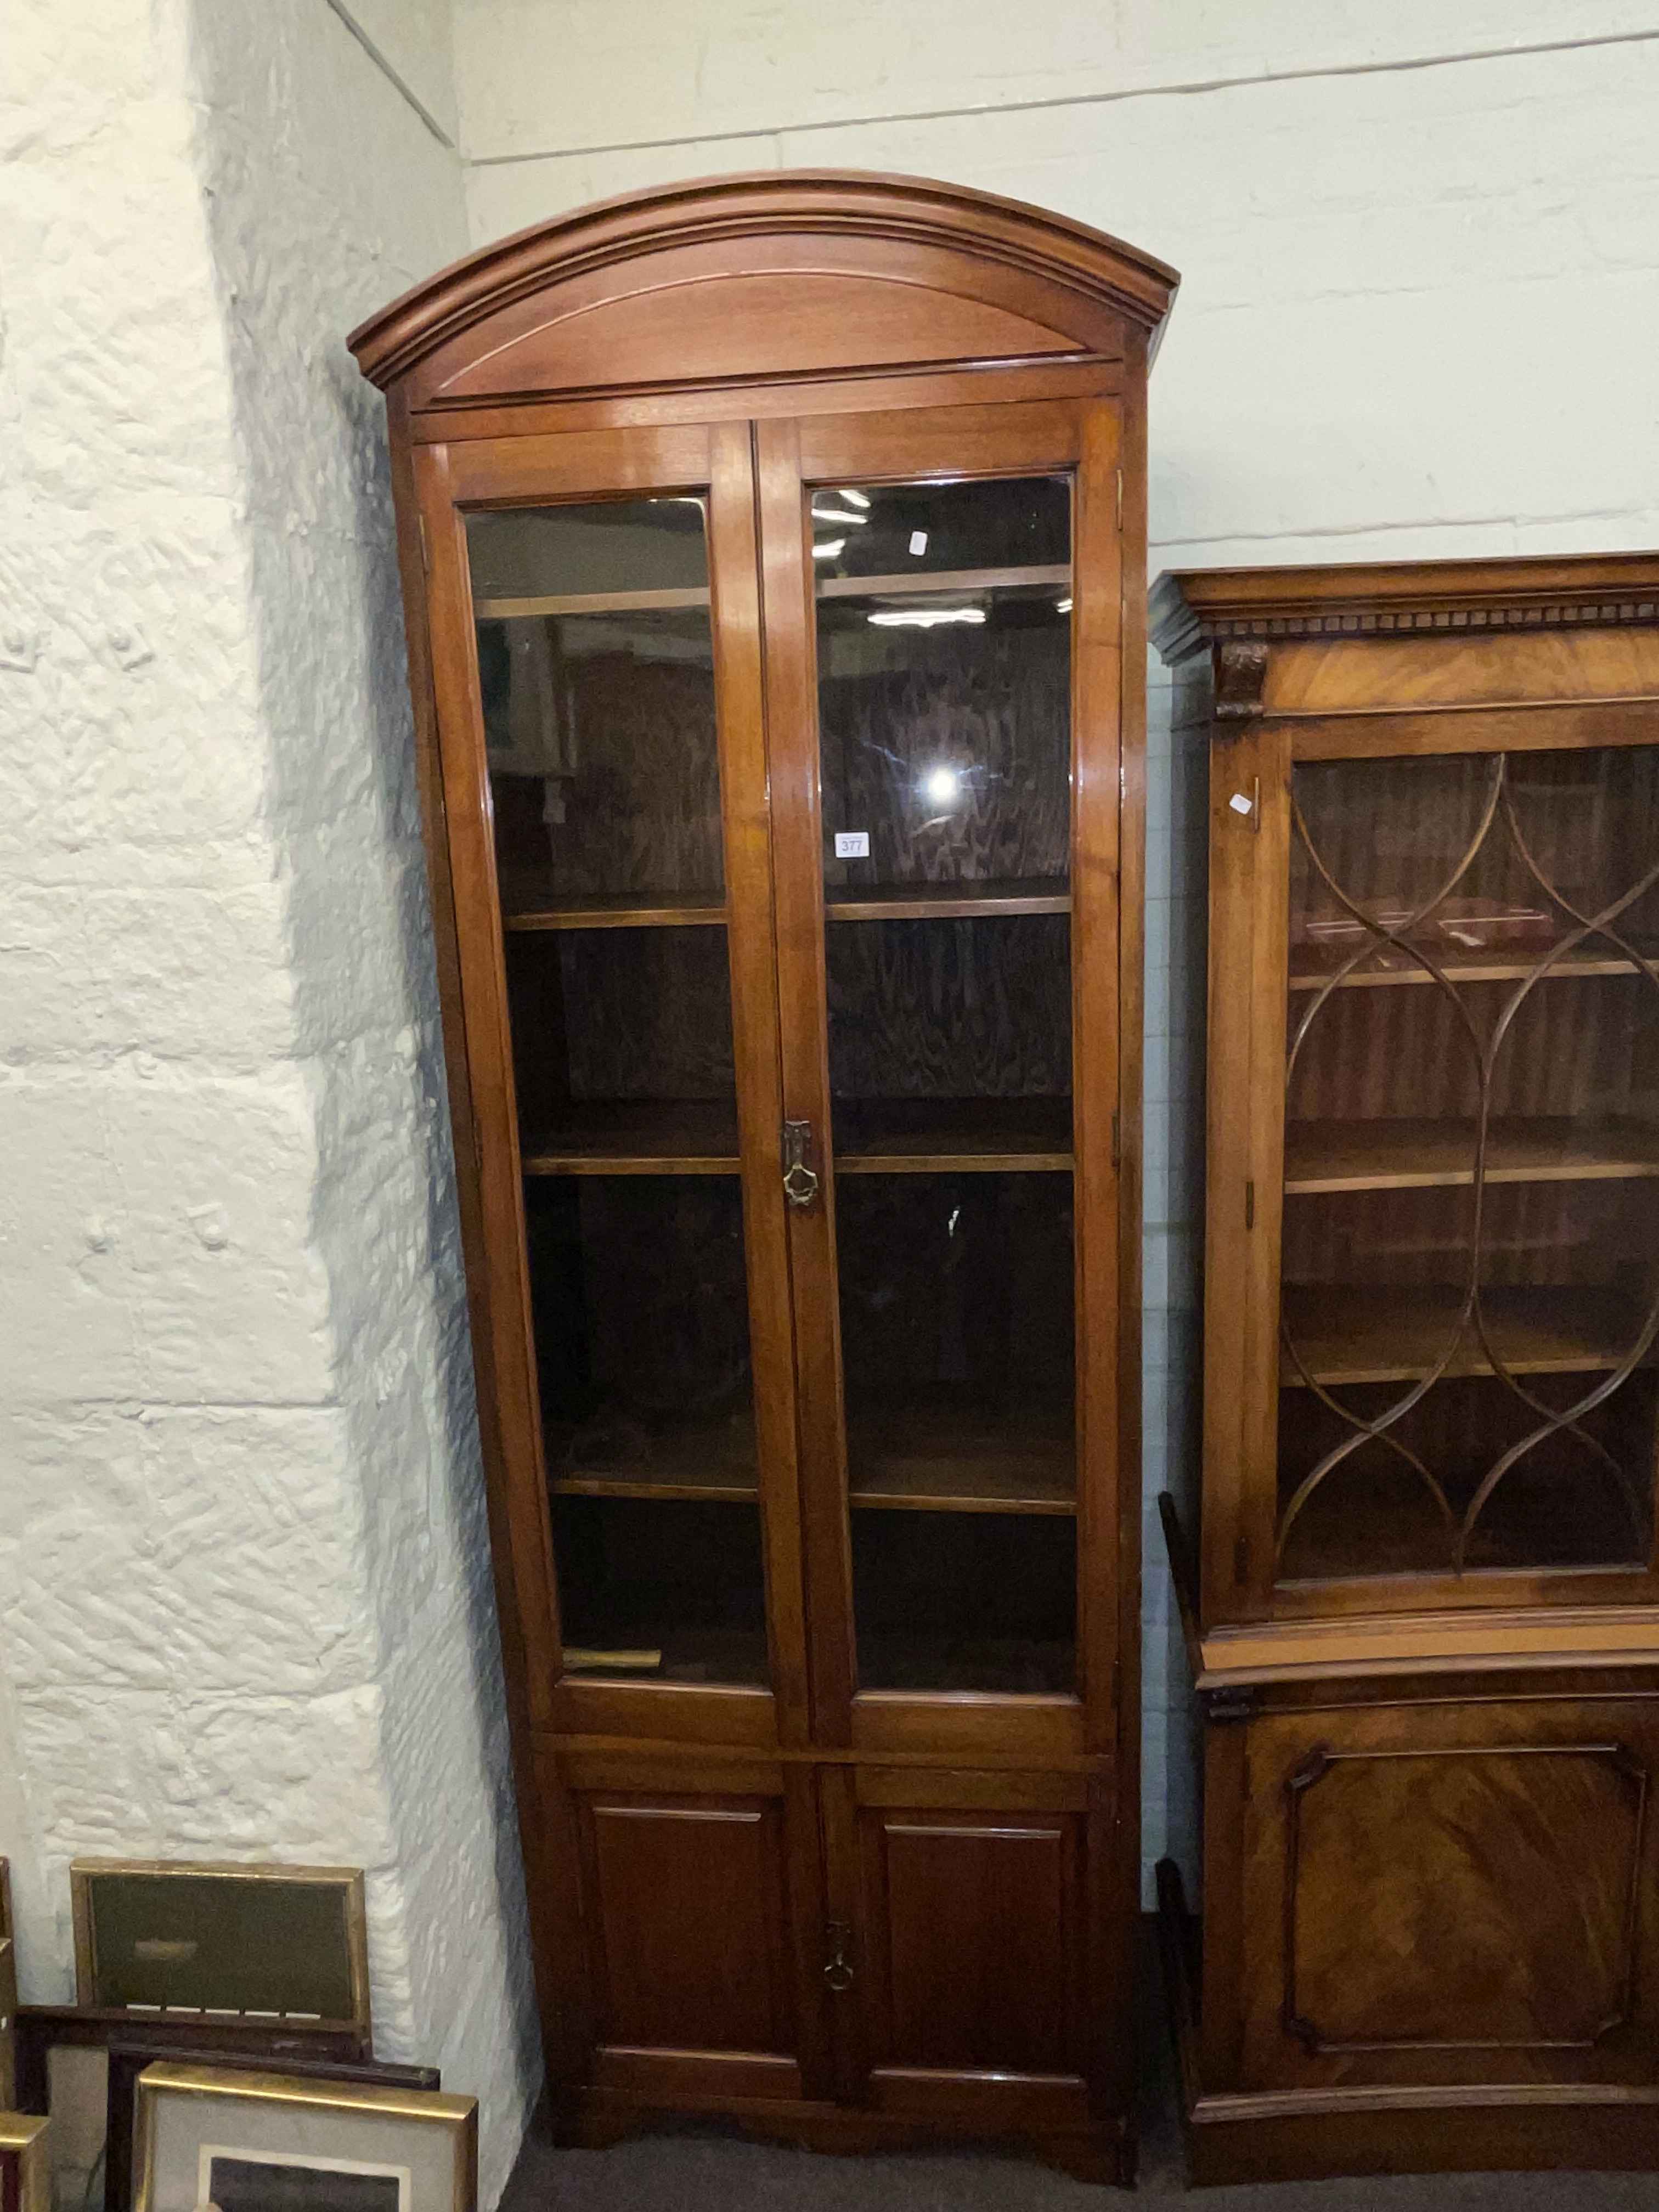 Early 20th Century four door cabinet bookcase 217cm by 77cm by 38cm.